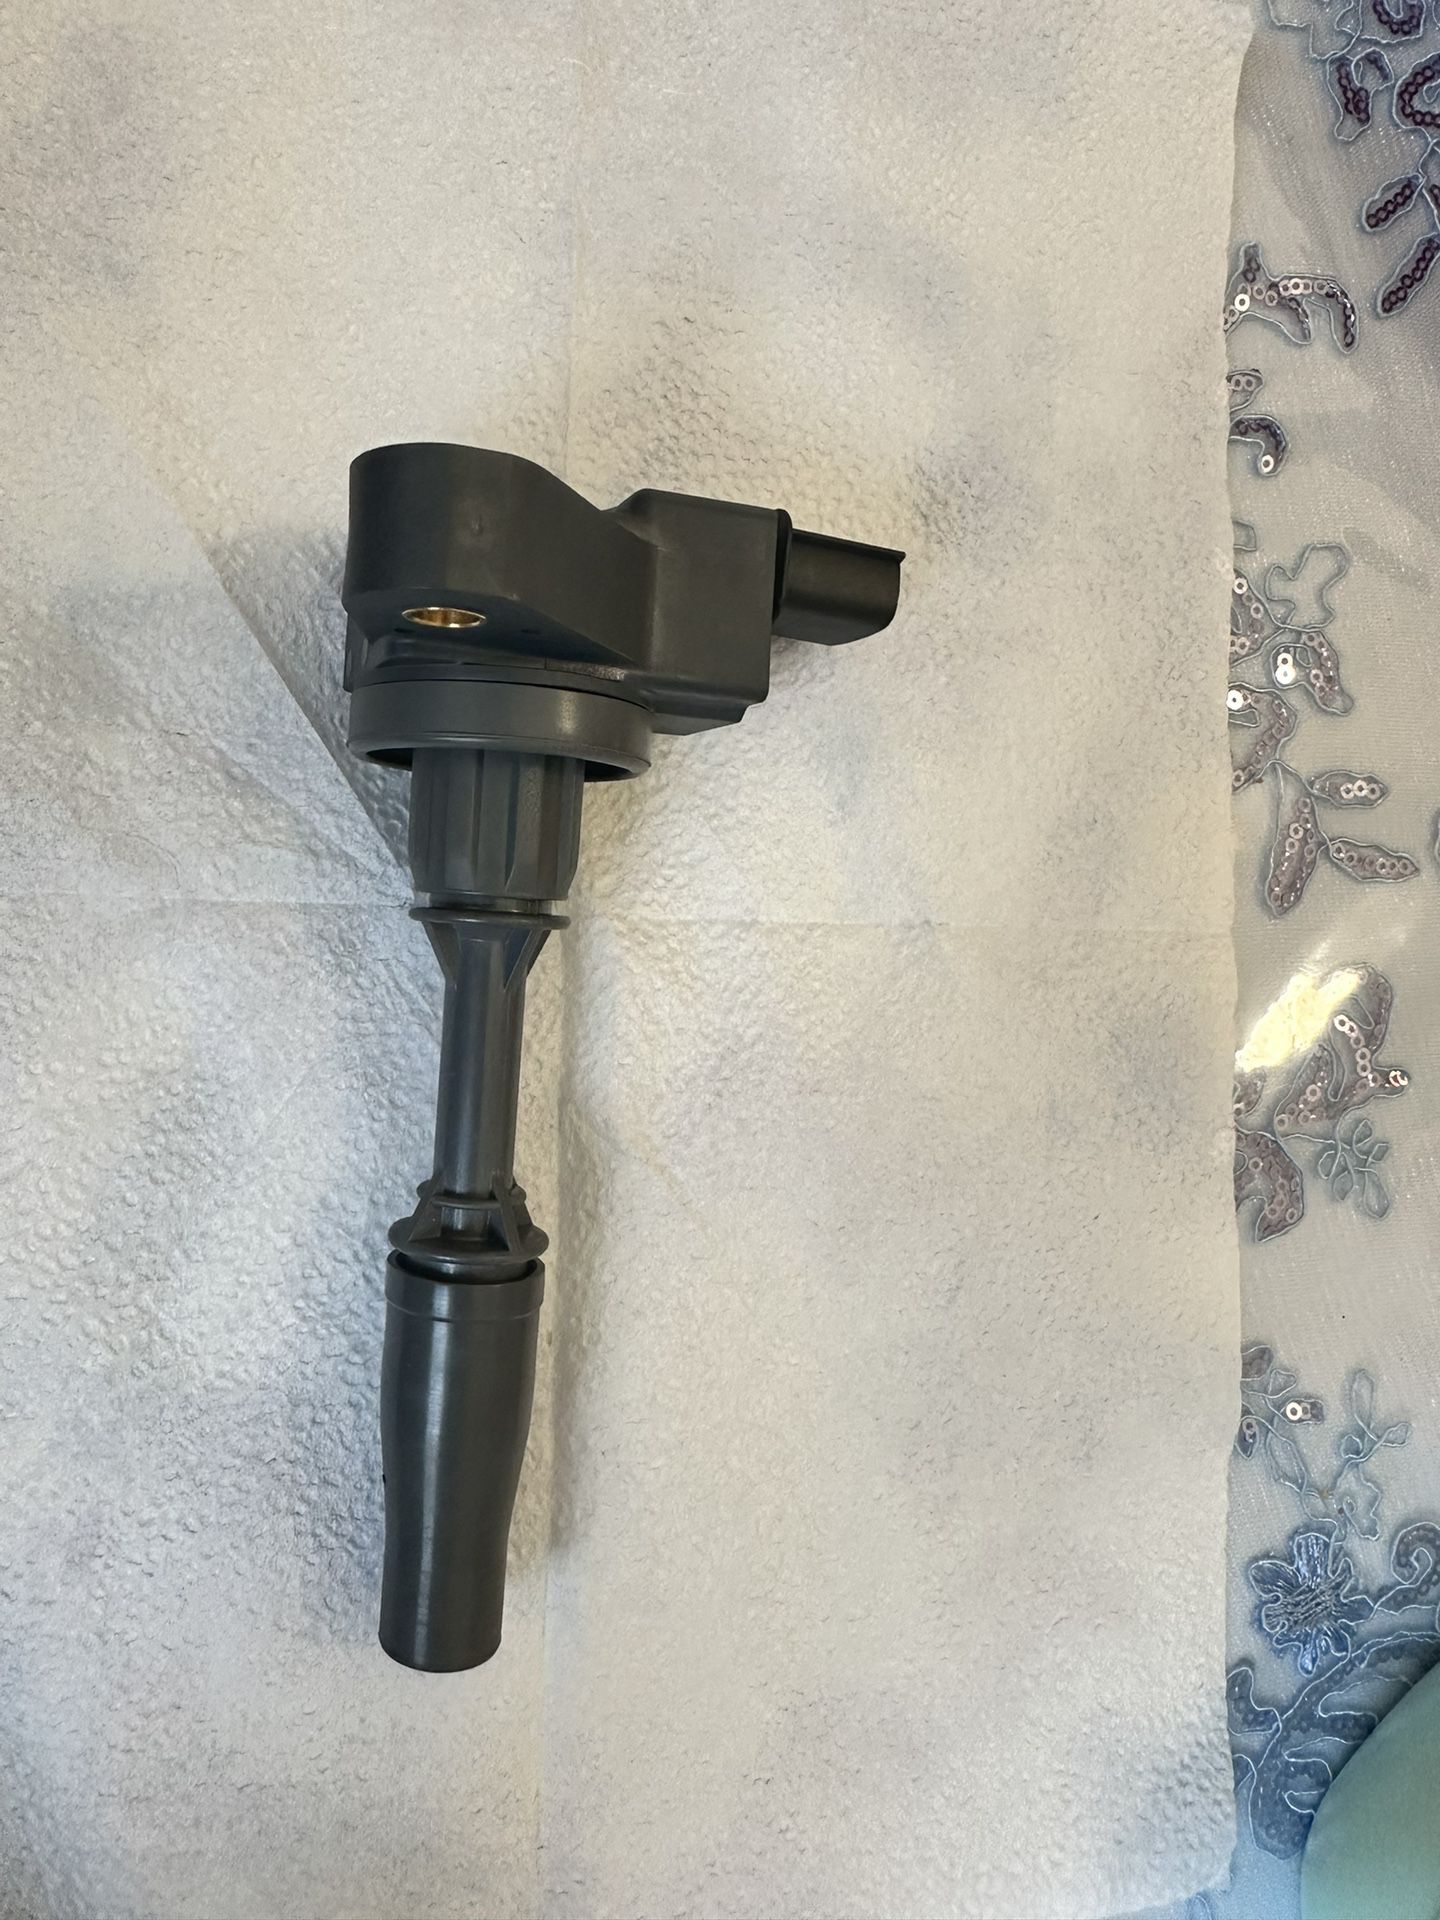 2013 Ignition Coil